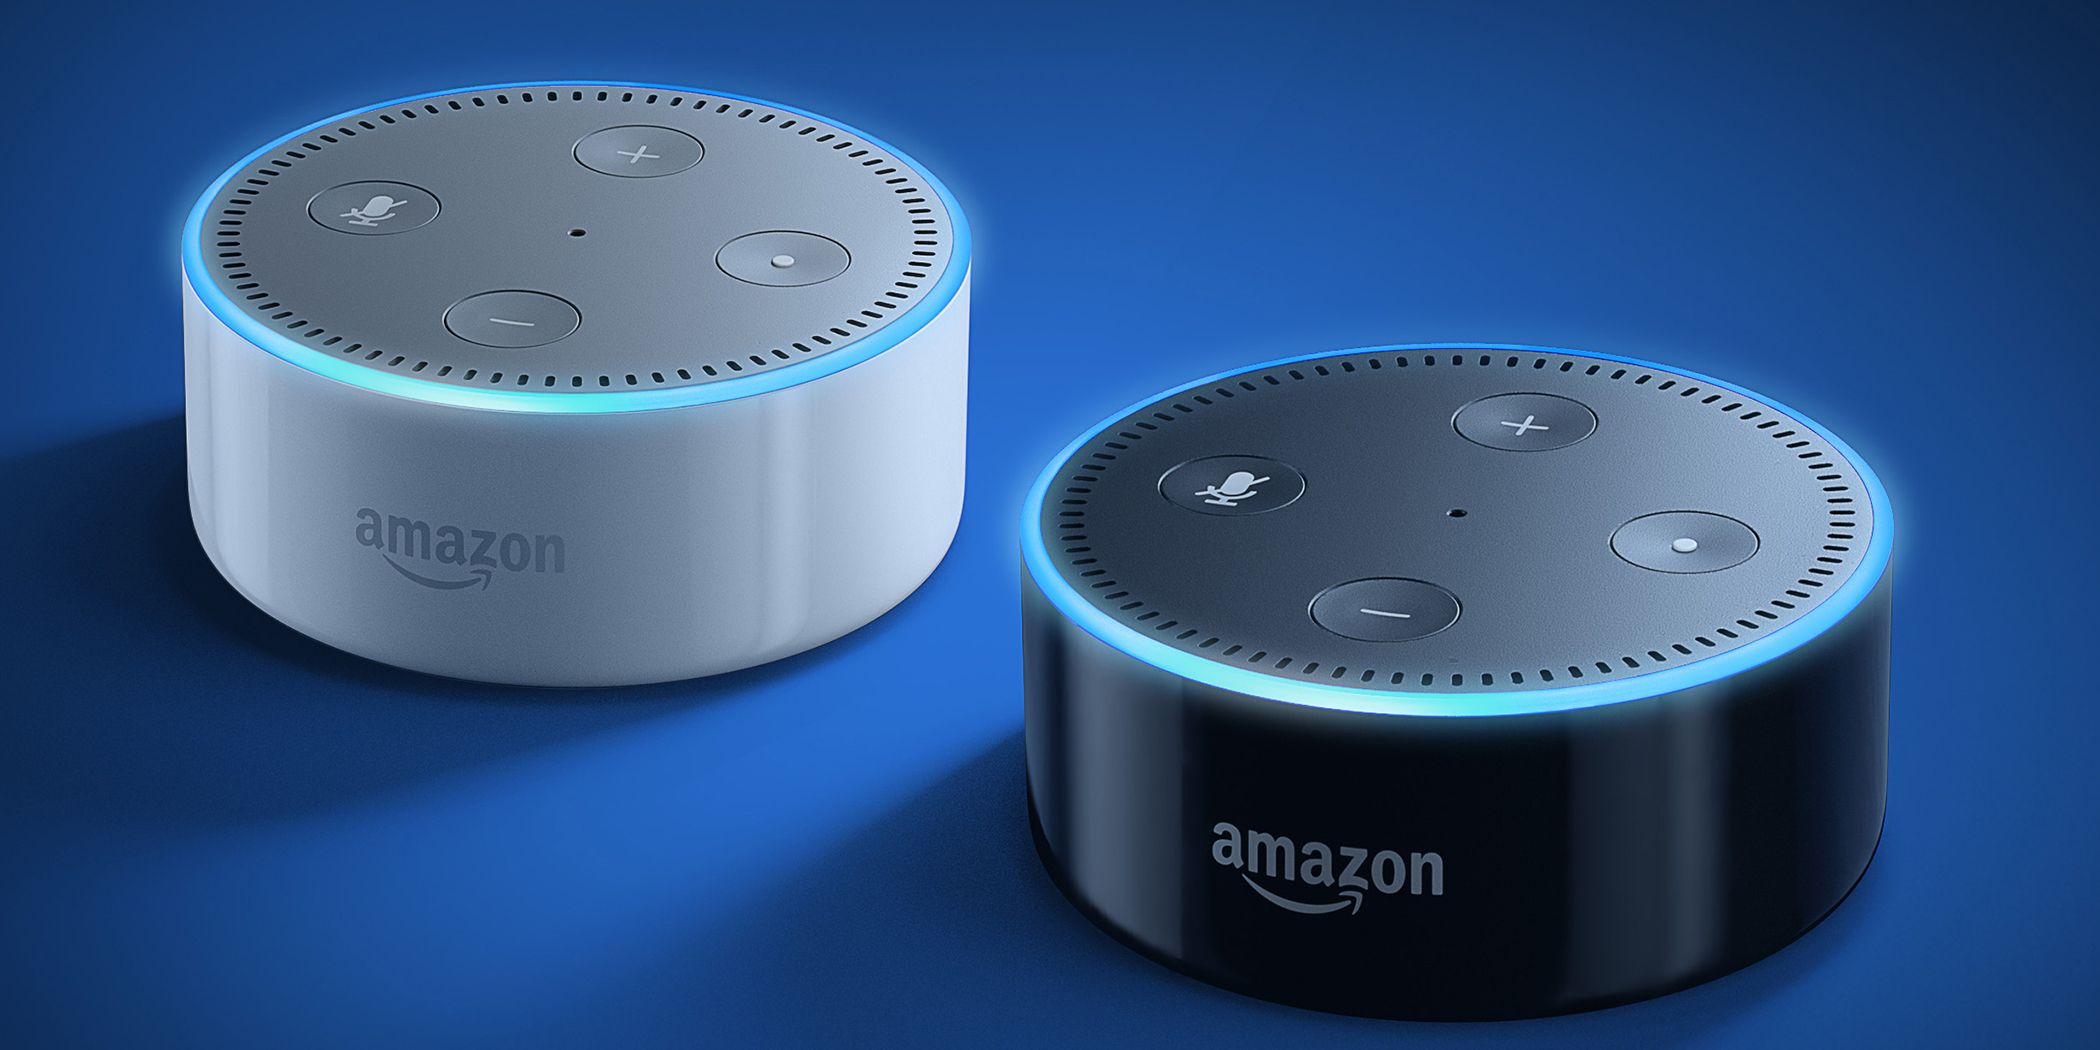 Two Amazon Echo devices on a blue background